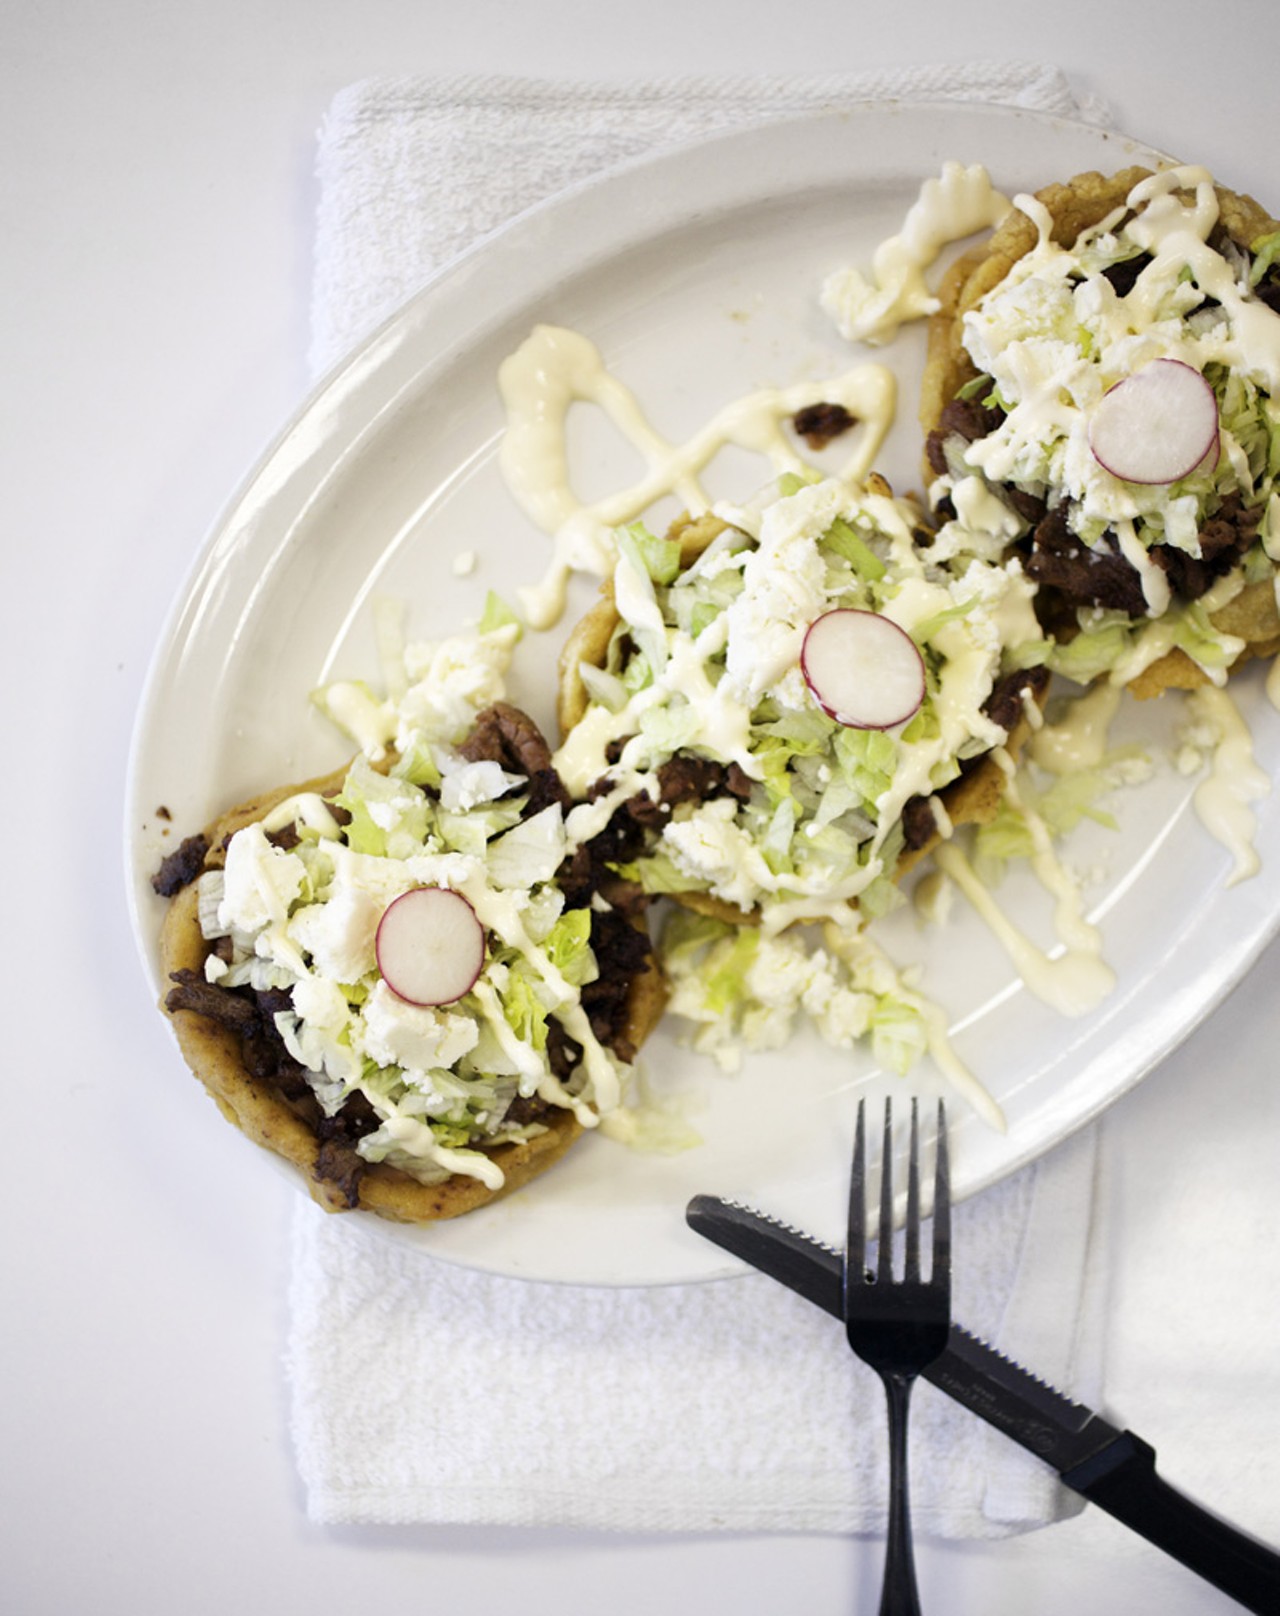 Sope is made with cornmeal, your choice of meat (shown here with beef), lettuce, Mexican sour cream, queso fresco and garnished with radishes.